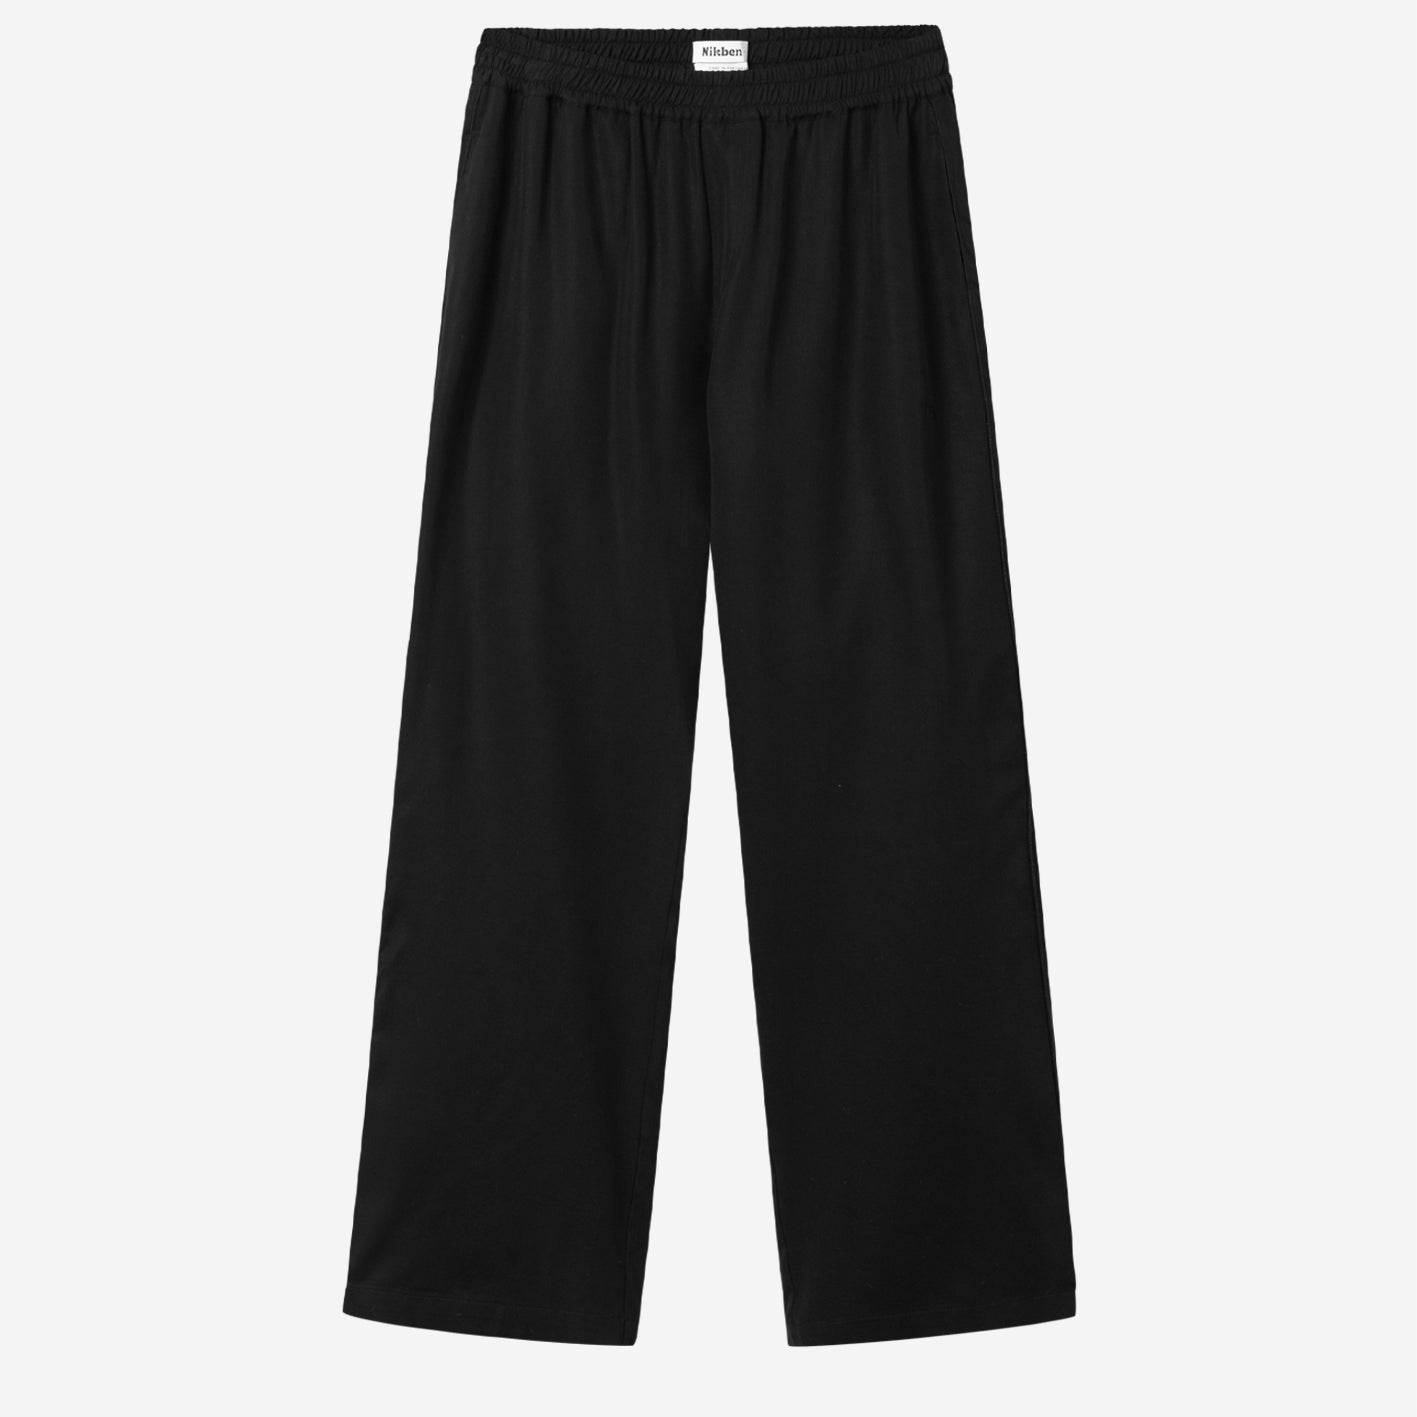 Black vacation pants with two front pockets and an elastic drawstring.